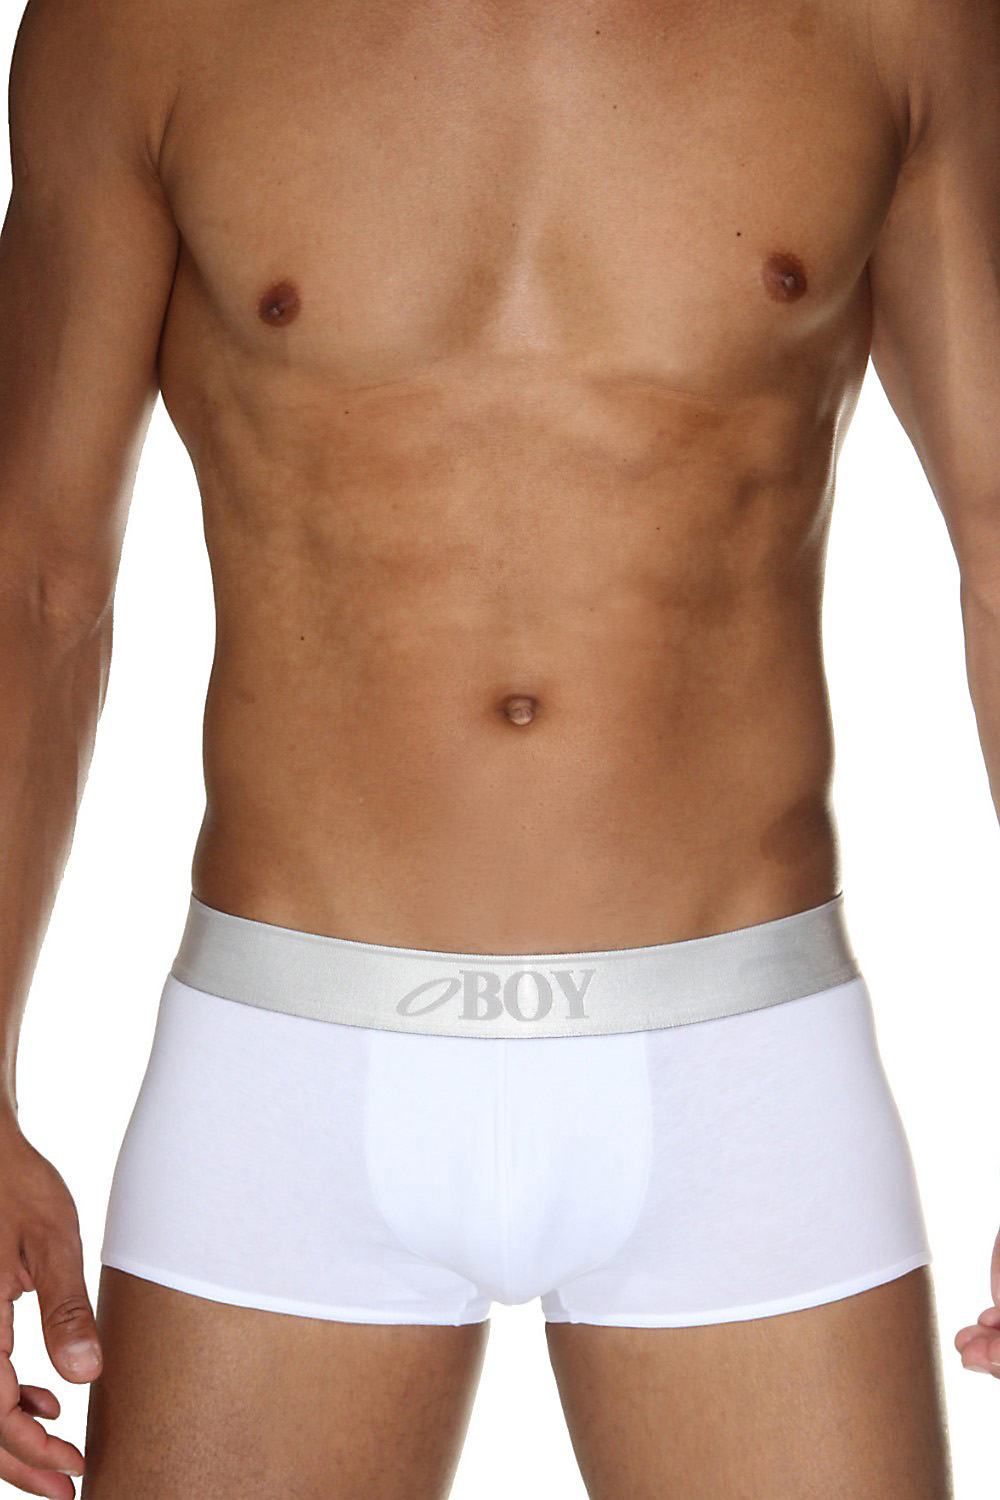 OBOY SILVER trunks at oboy.com